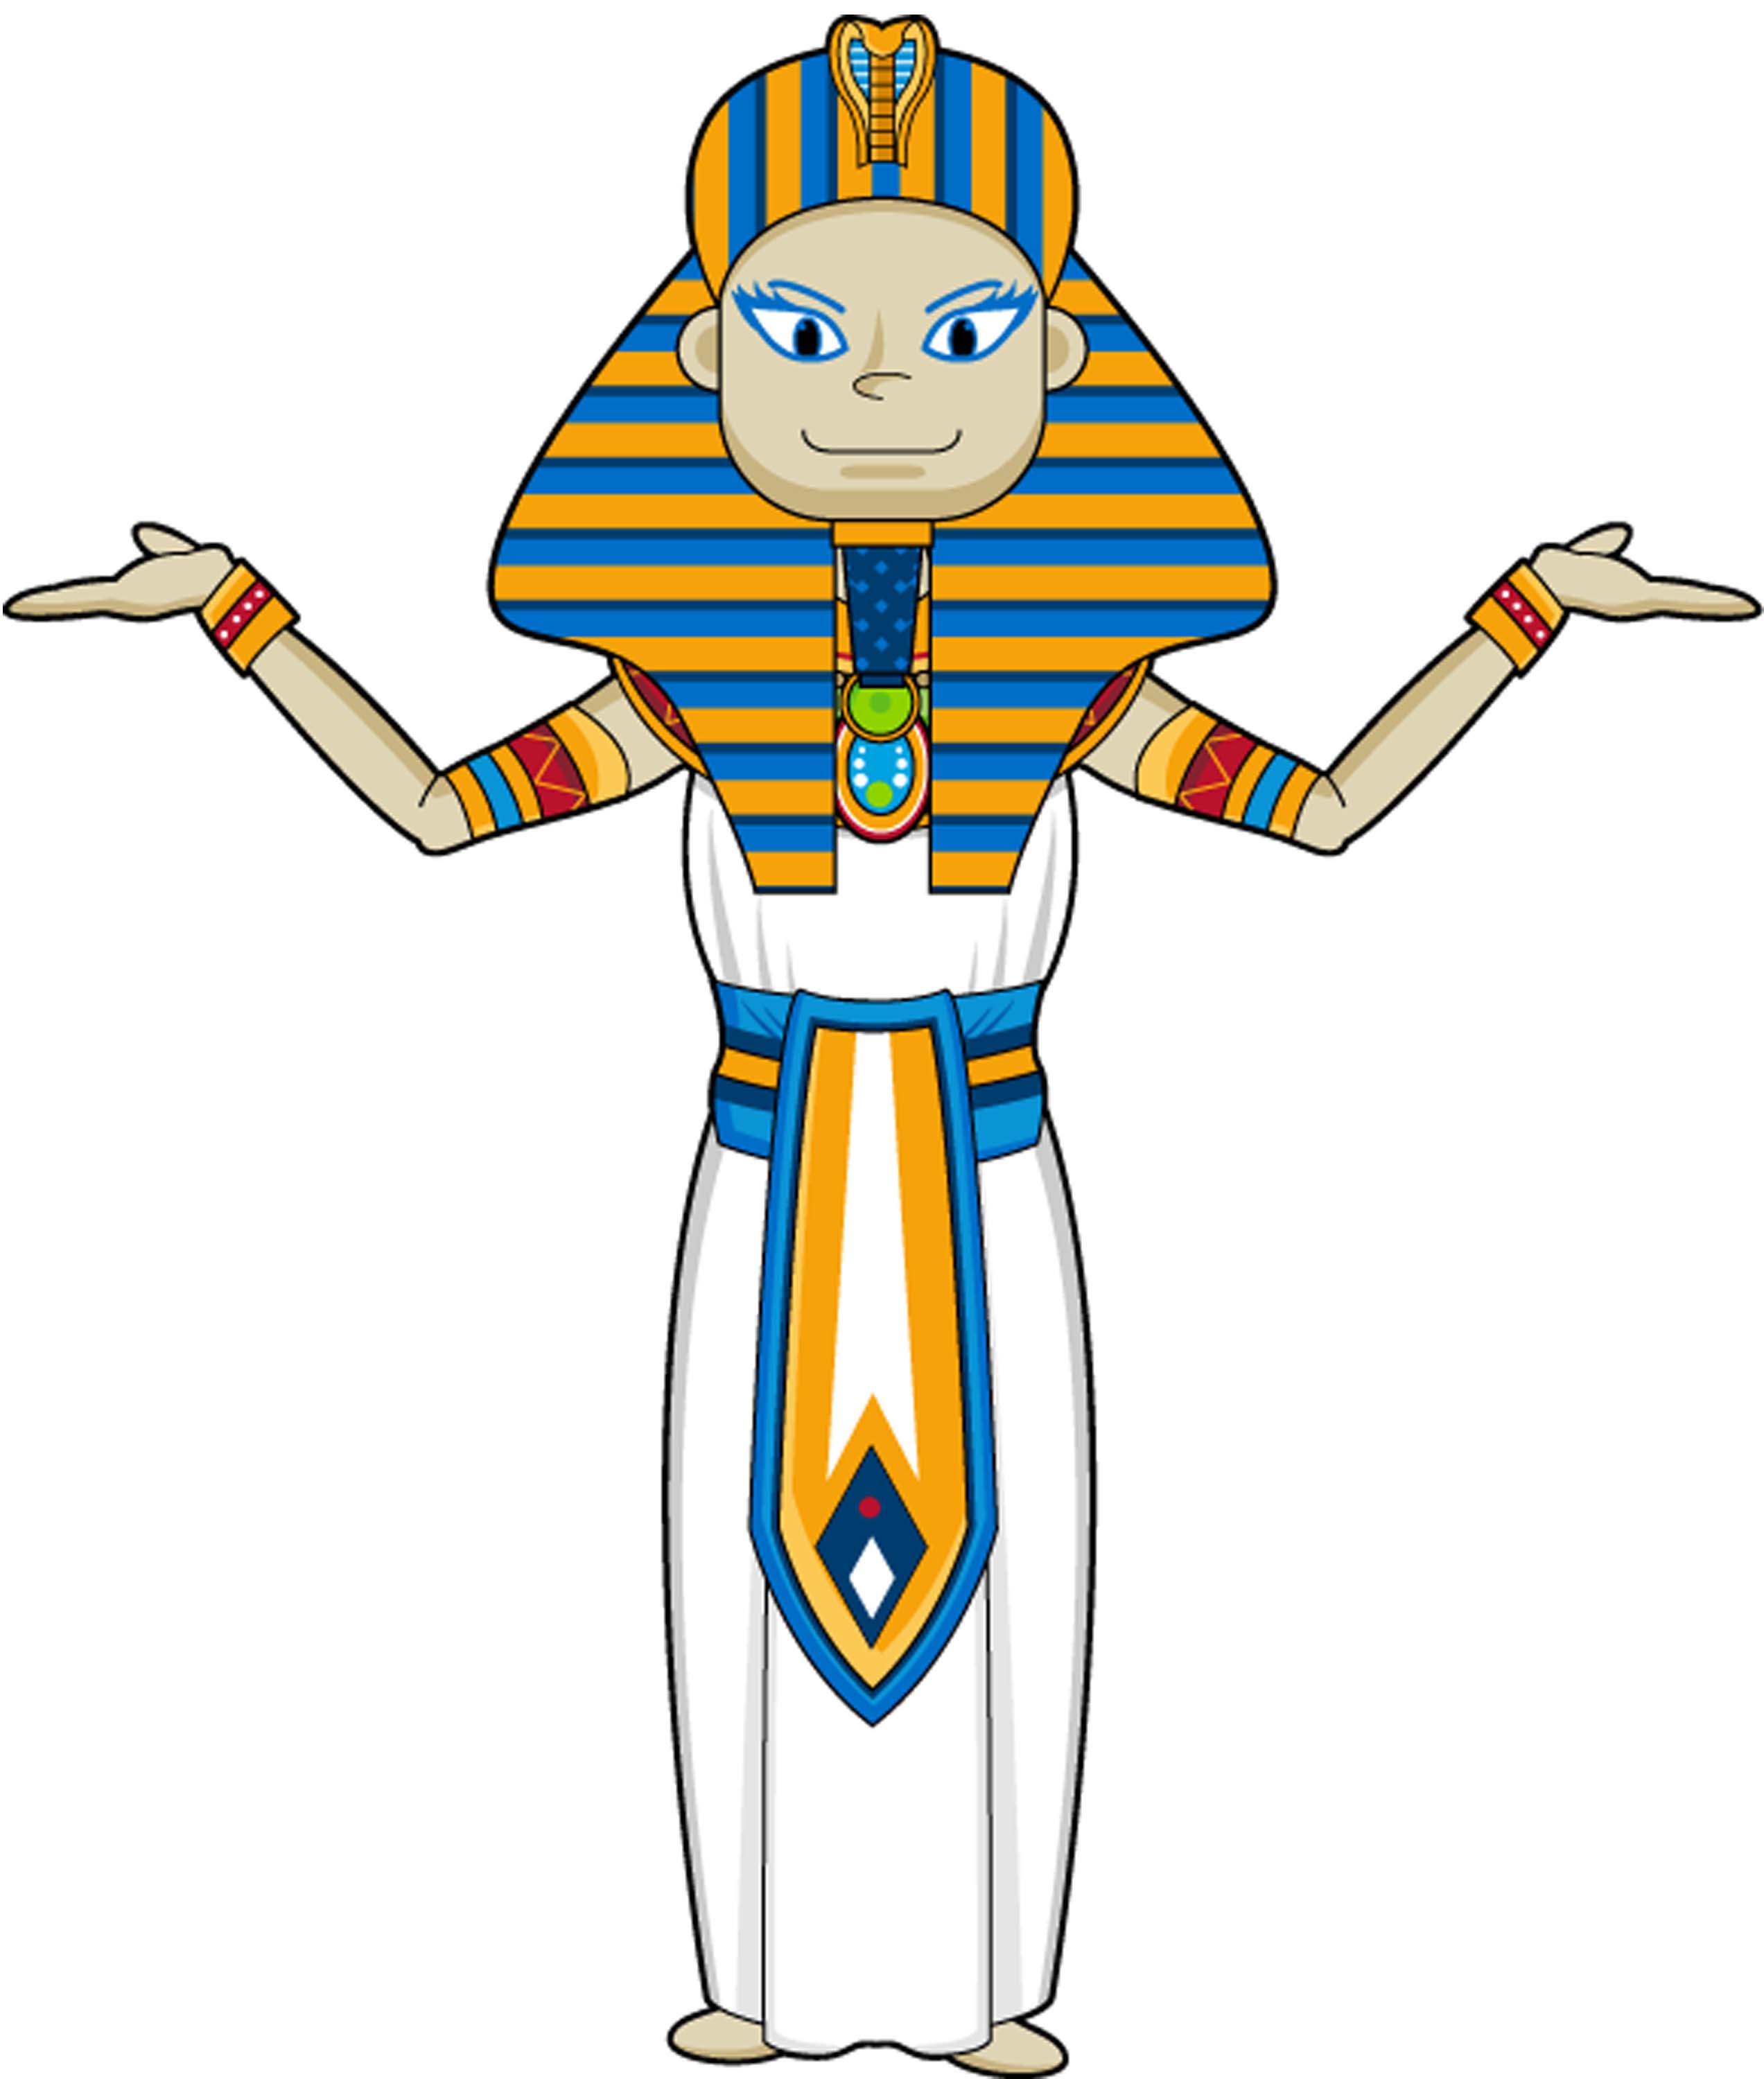 Ancient Egypt Images For Kids | Free Download Clip Art | Free Clip ...